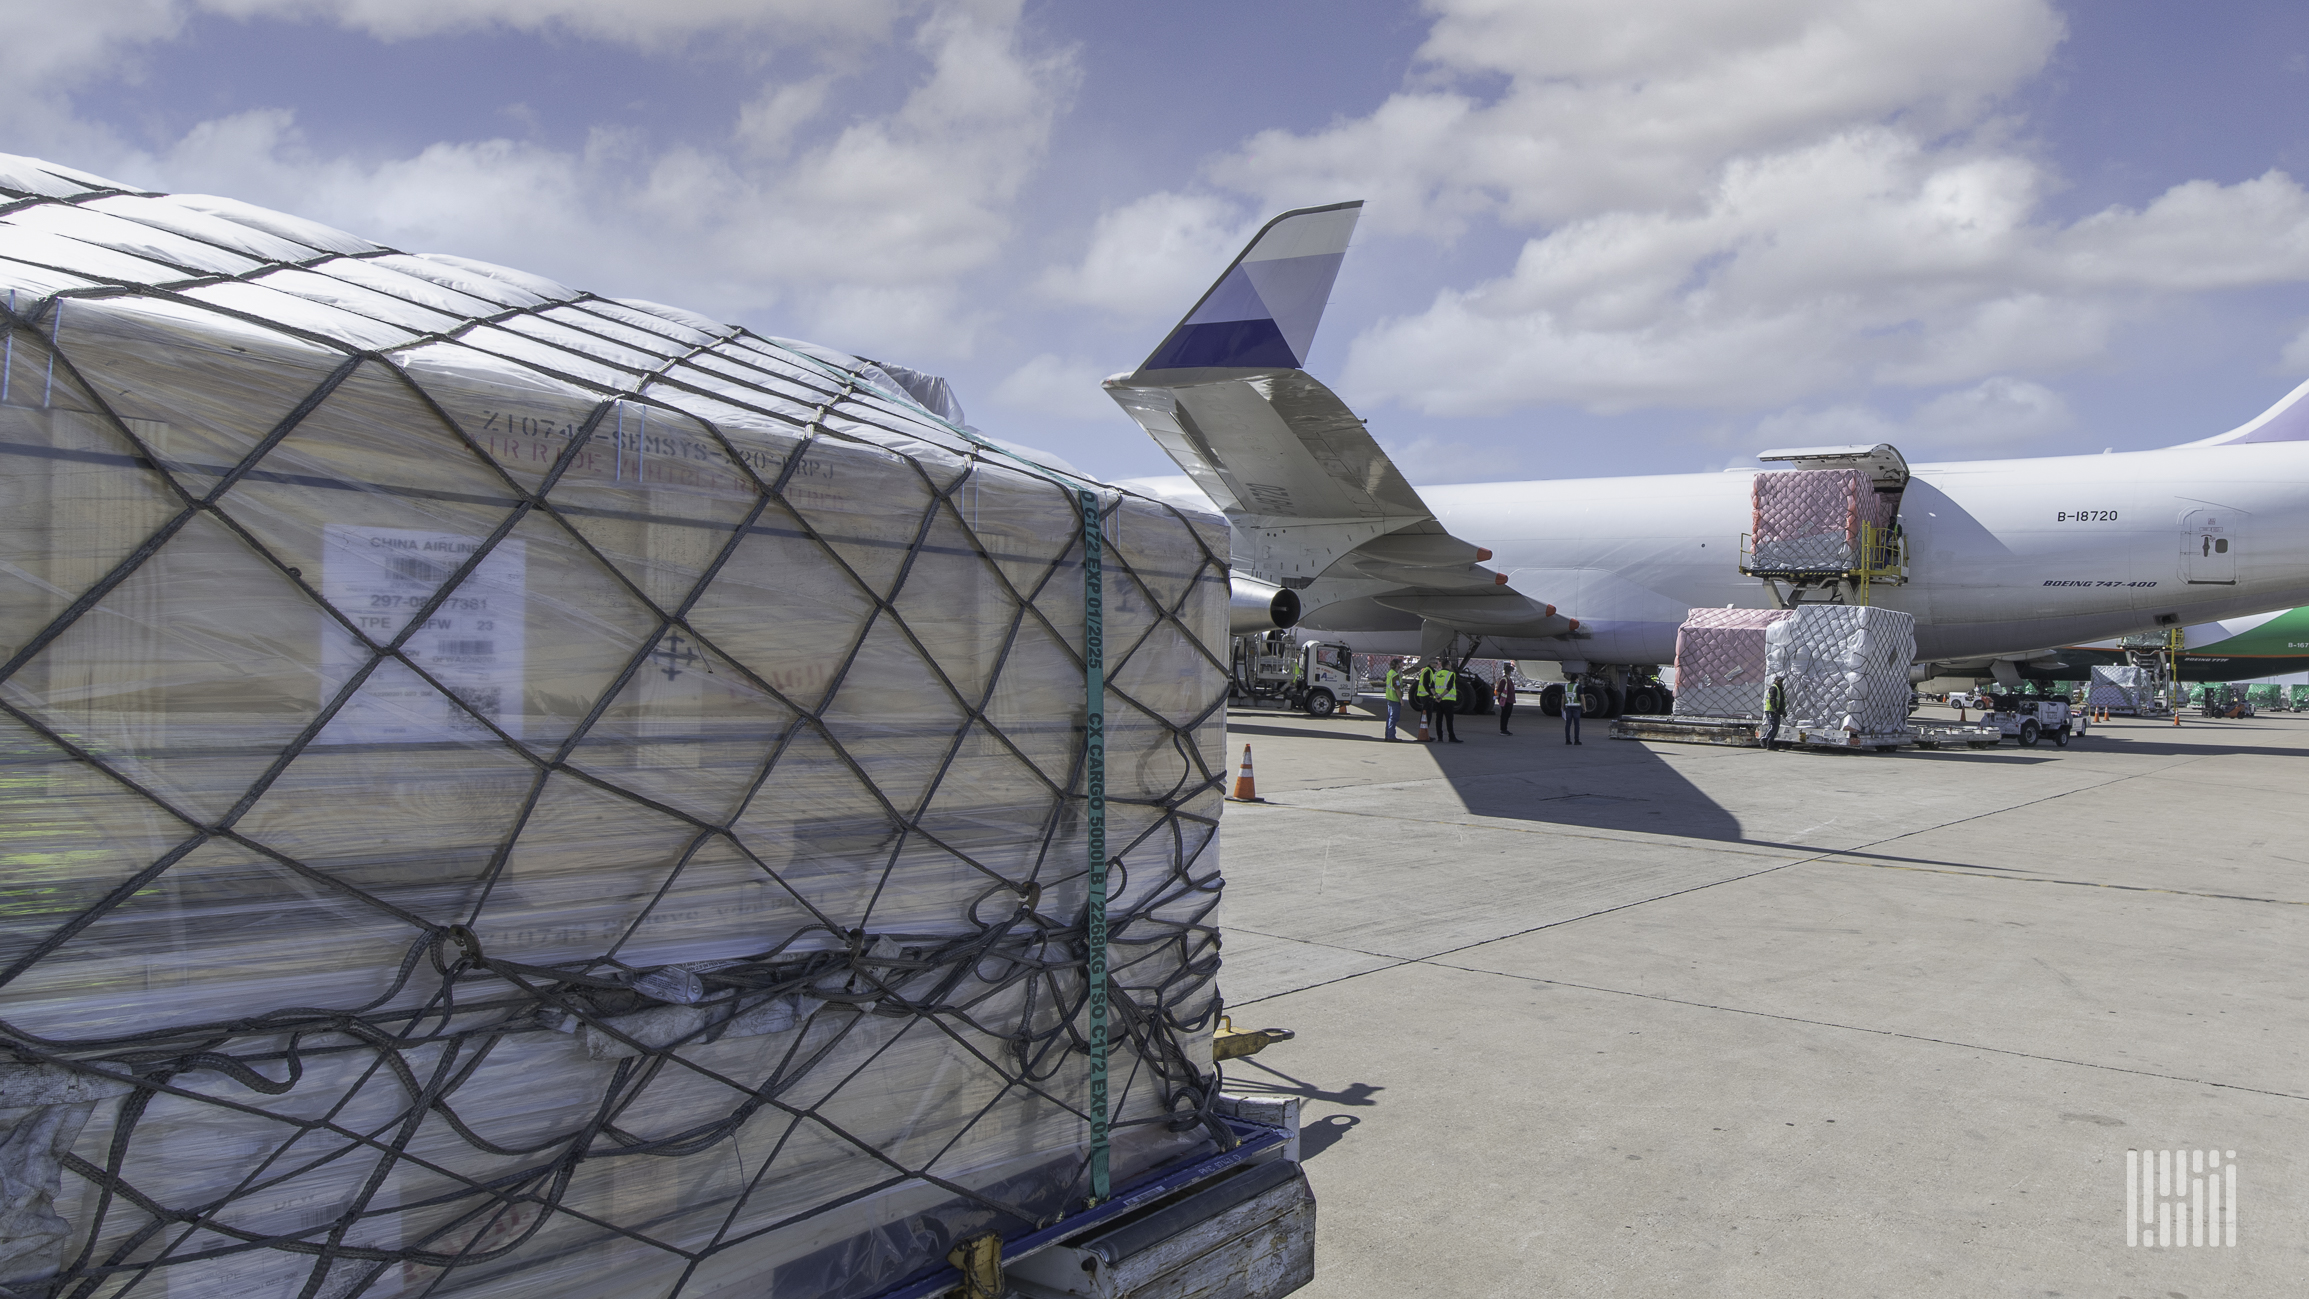 A pallet of cargo with netting sits on tarmac with a large freighter in the background. The air freight recovery stumbled in March because of the Ukraine war and other factors.